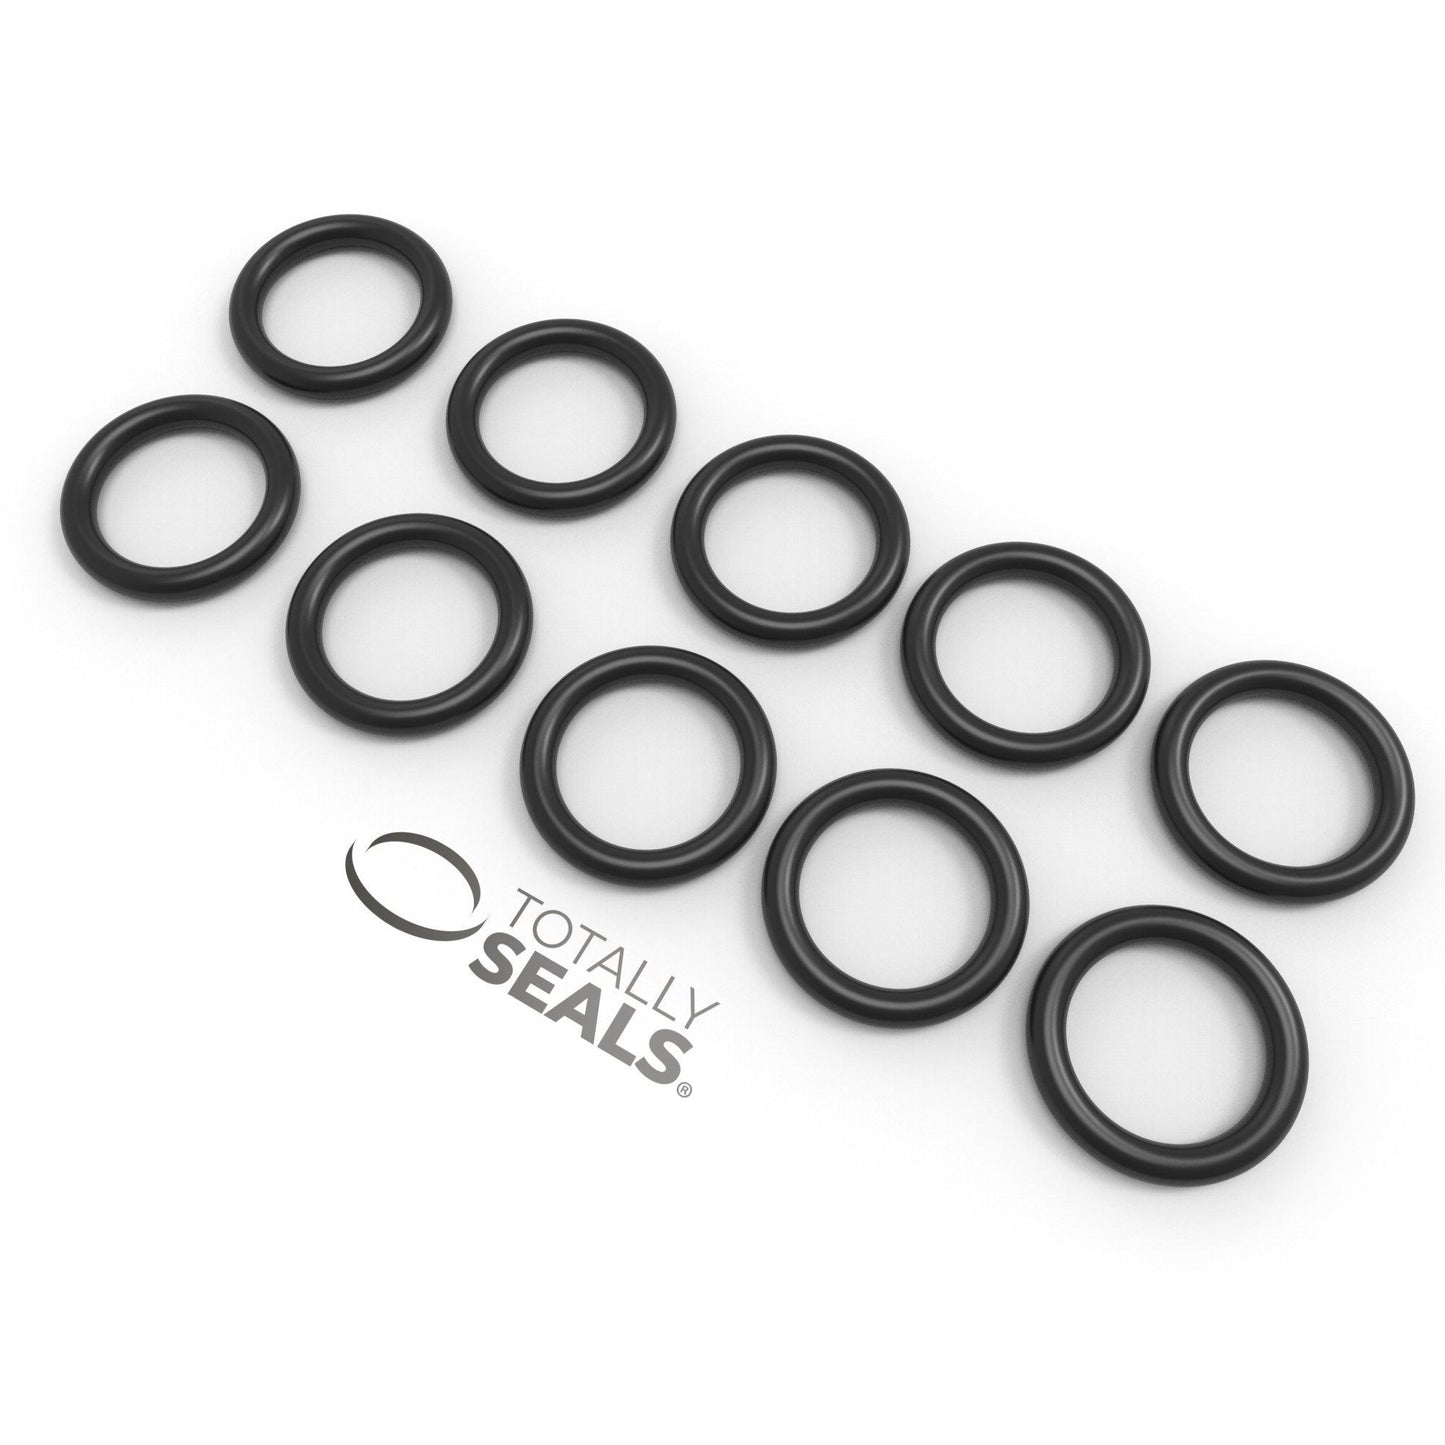 21mm x 1mm (23mm OD) Nitrile O-Rings - Totally Seals®